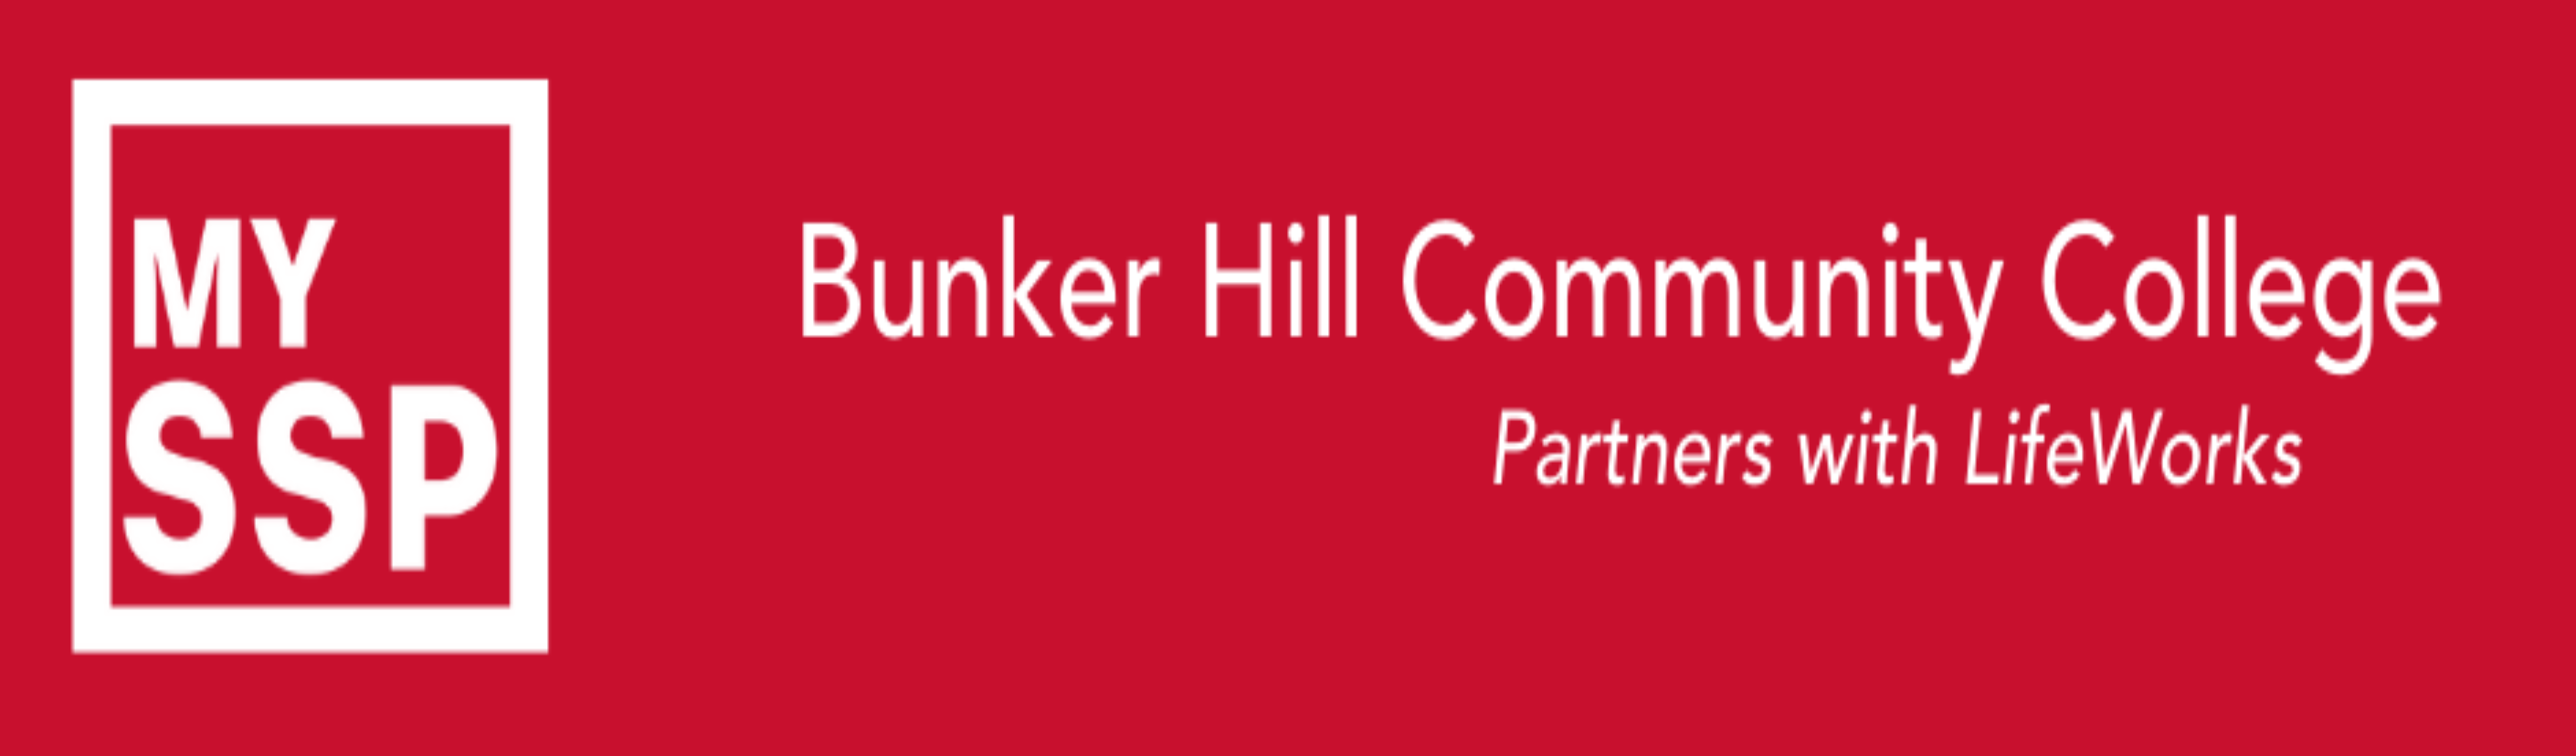 My SSP. Bunker Hill Communty College Partners with LifeWorks